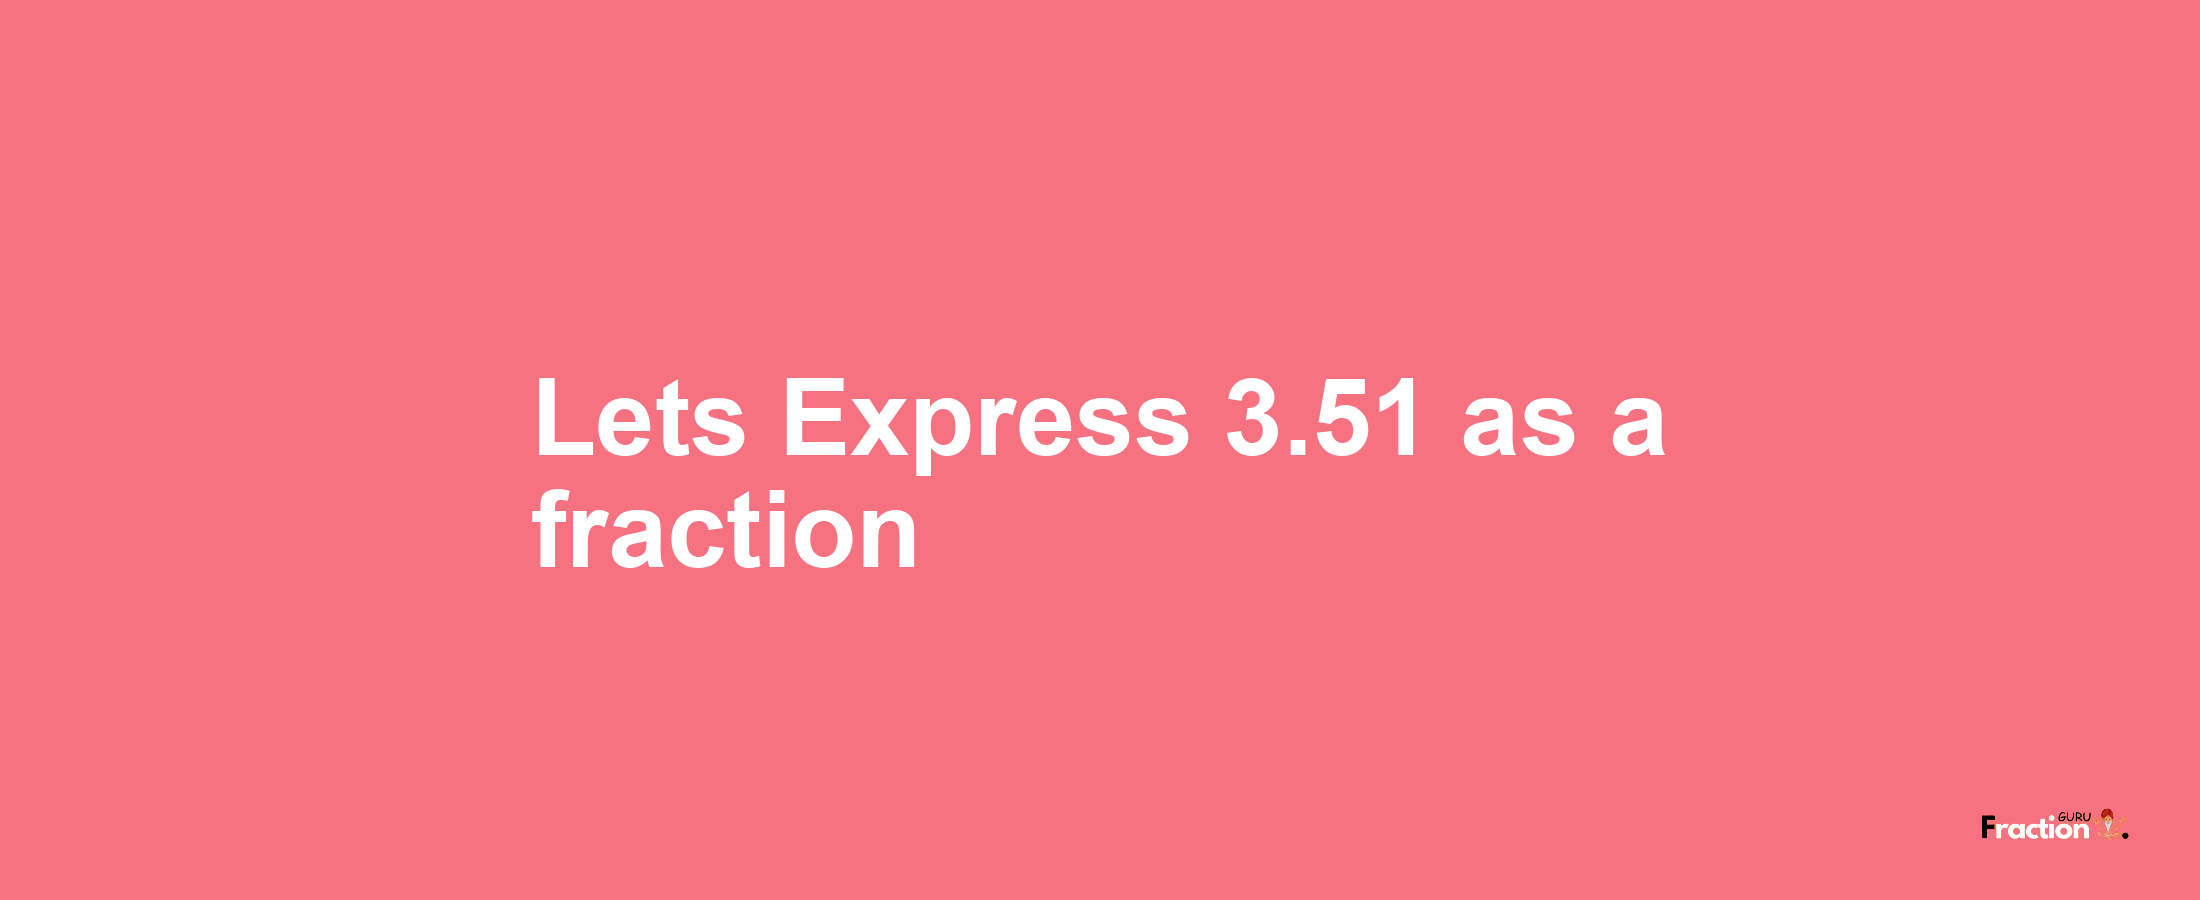 Lets Express 3.51 as afraction